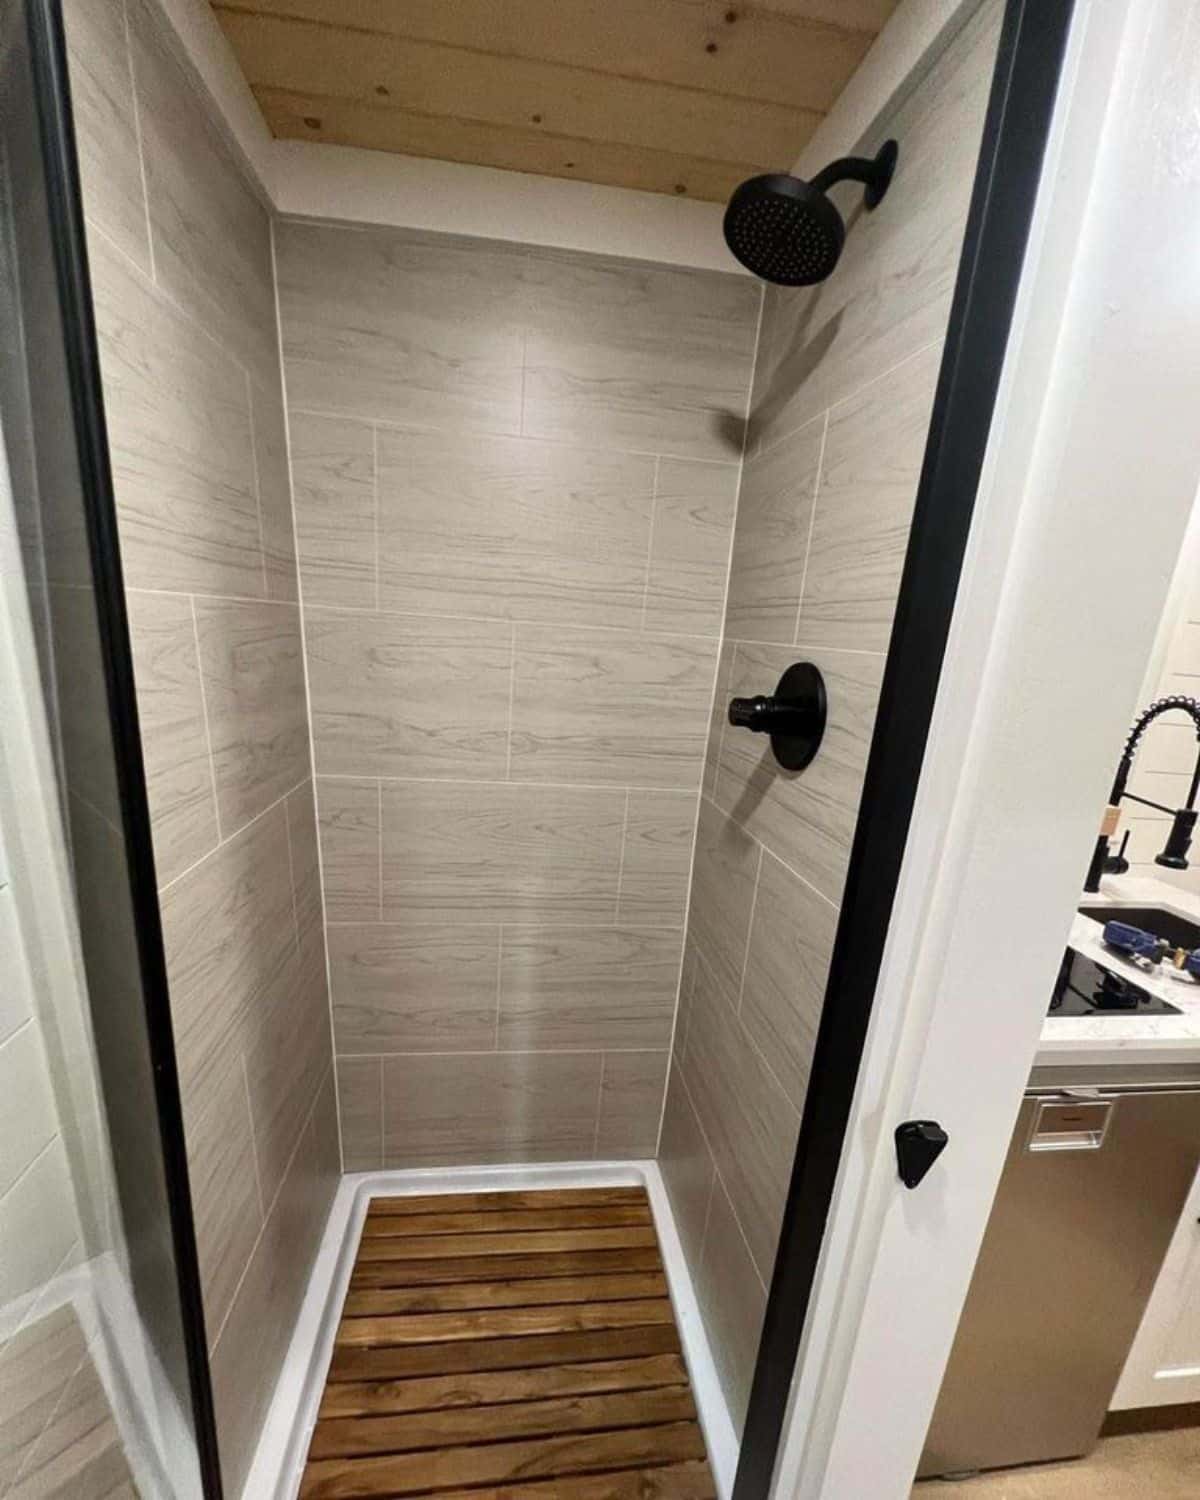 Shower area of perfect tiny room on wheels